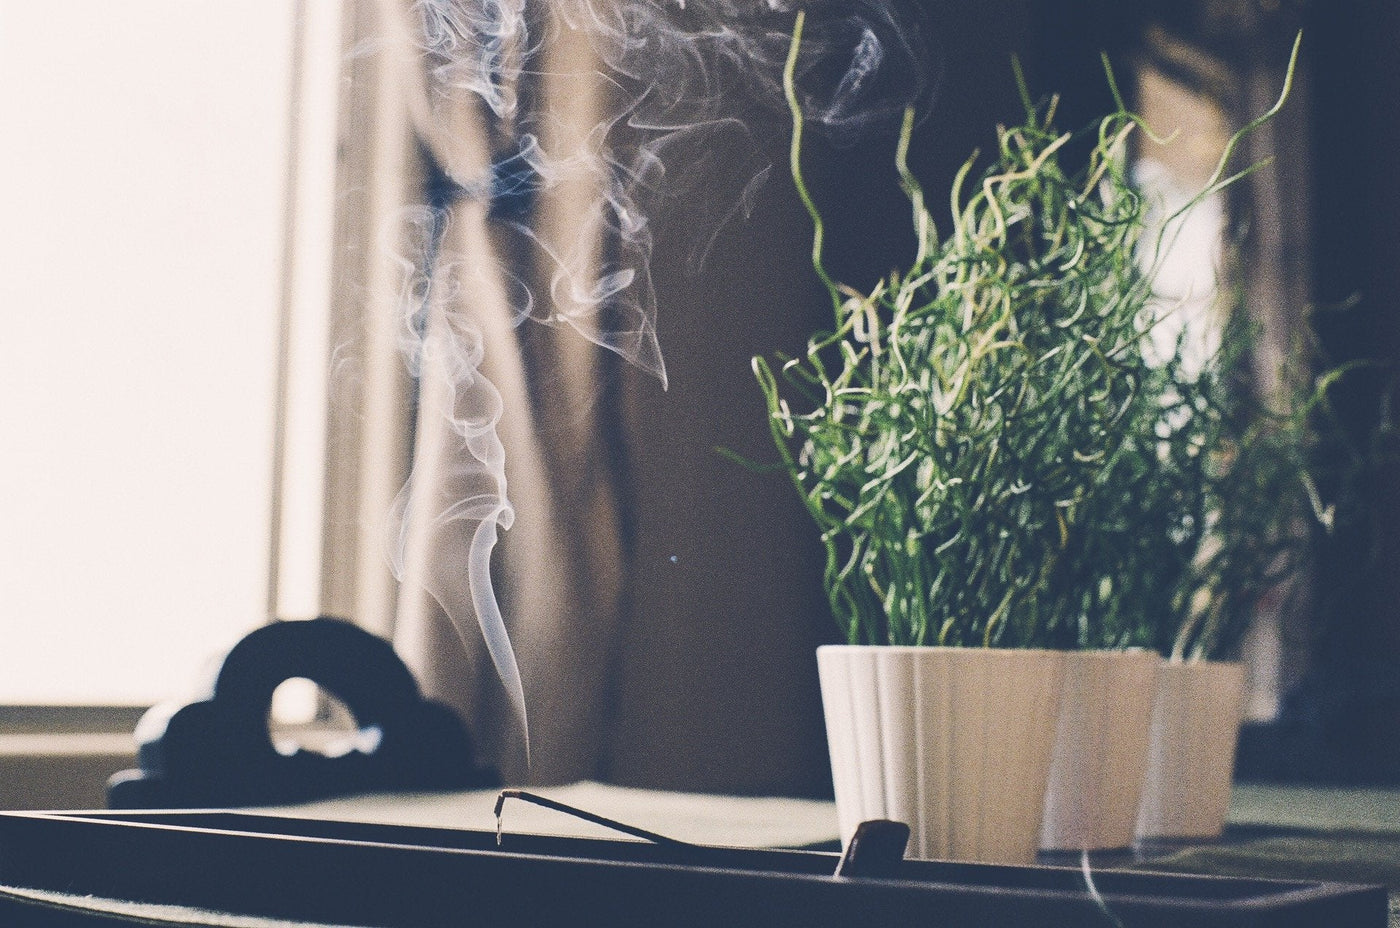 Incense : An easy way to improve your indoor air - Decor for Smell, Decor for Wellbeing, Home Decor Ideas, Incense, Mental and Emotional Health - Forest Homes